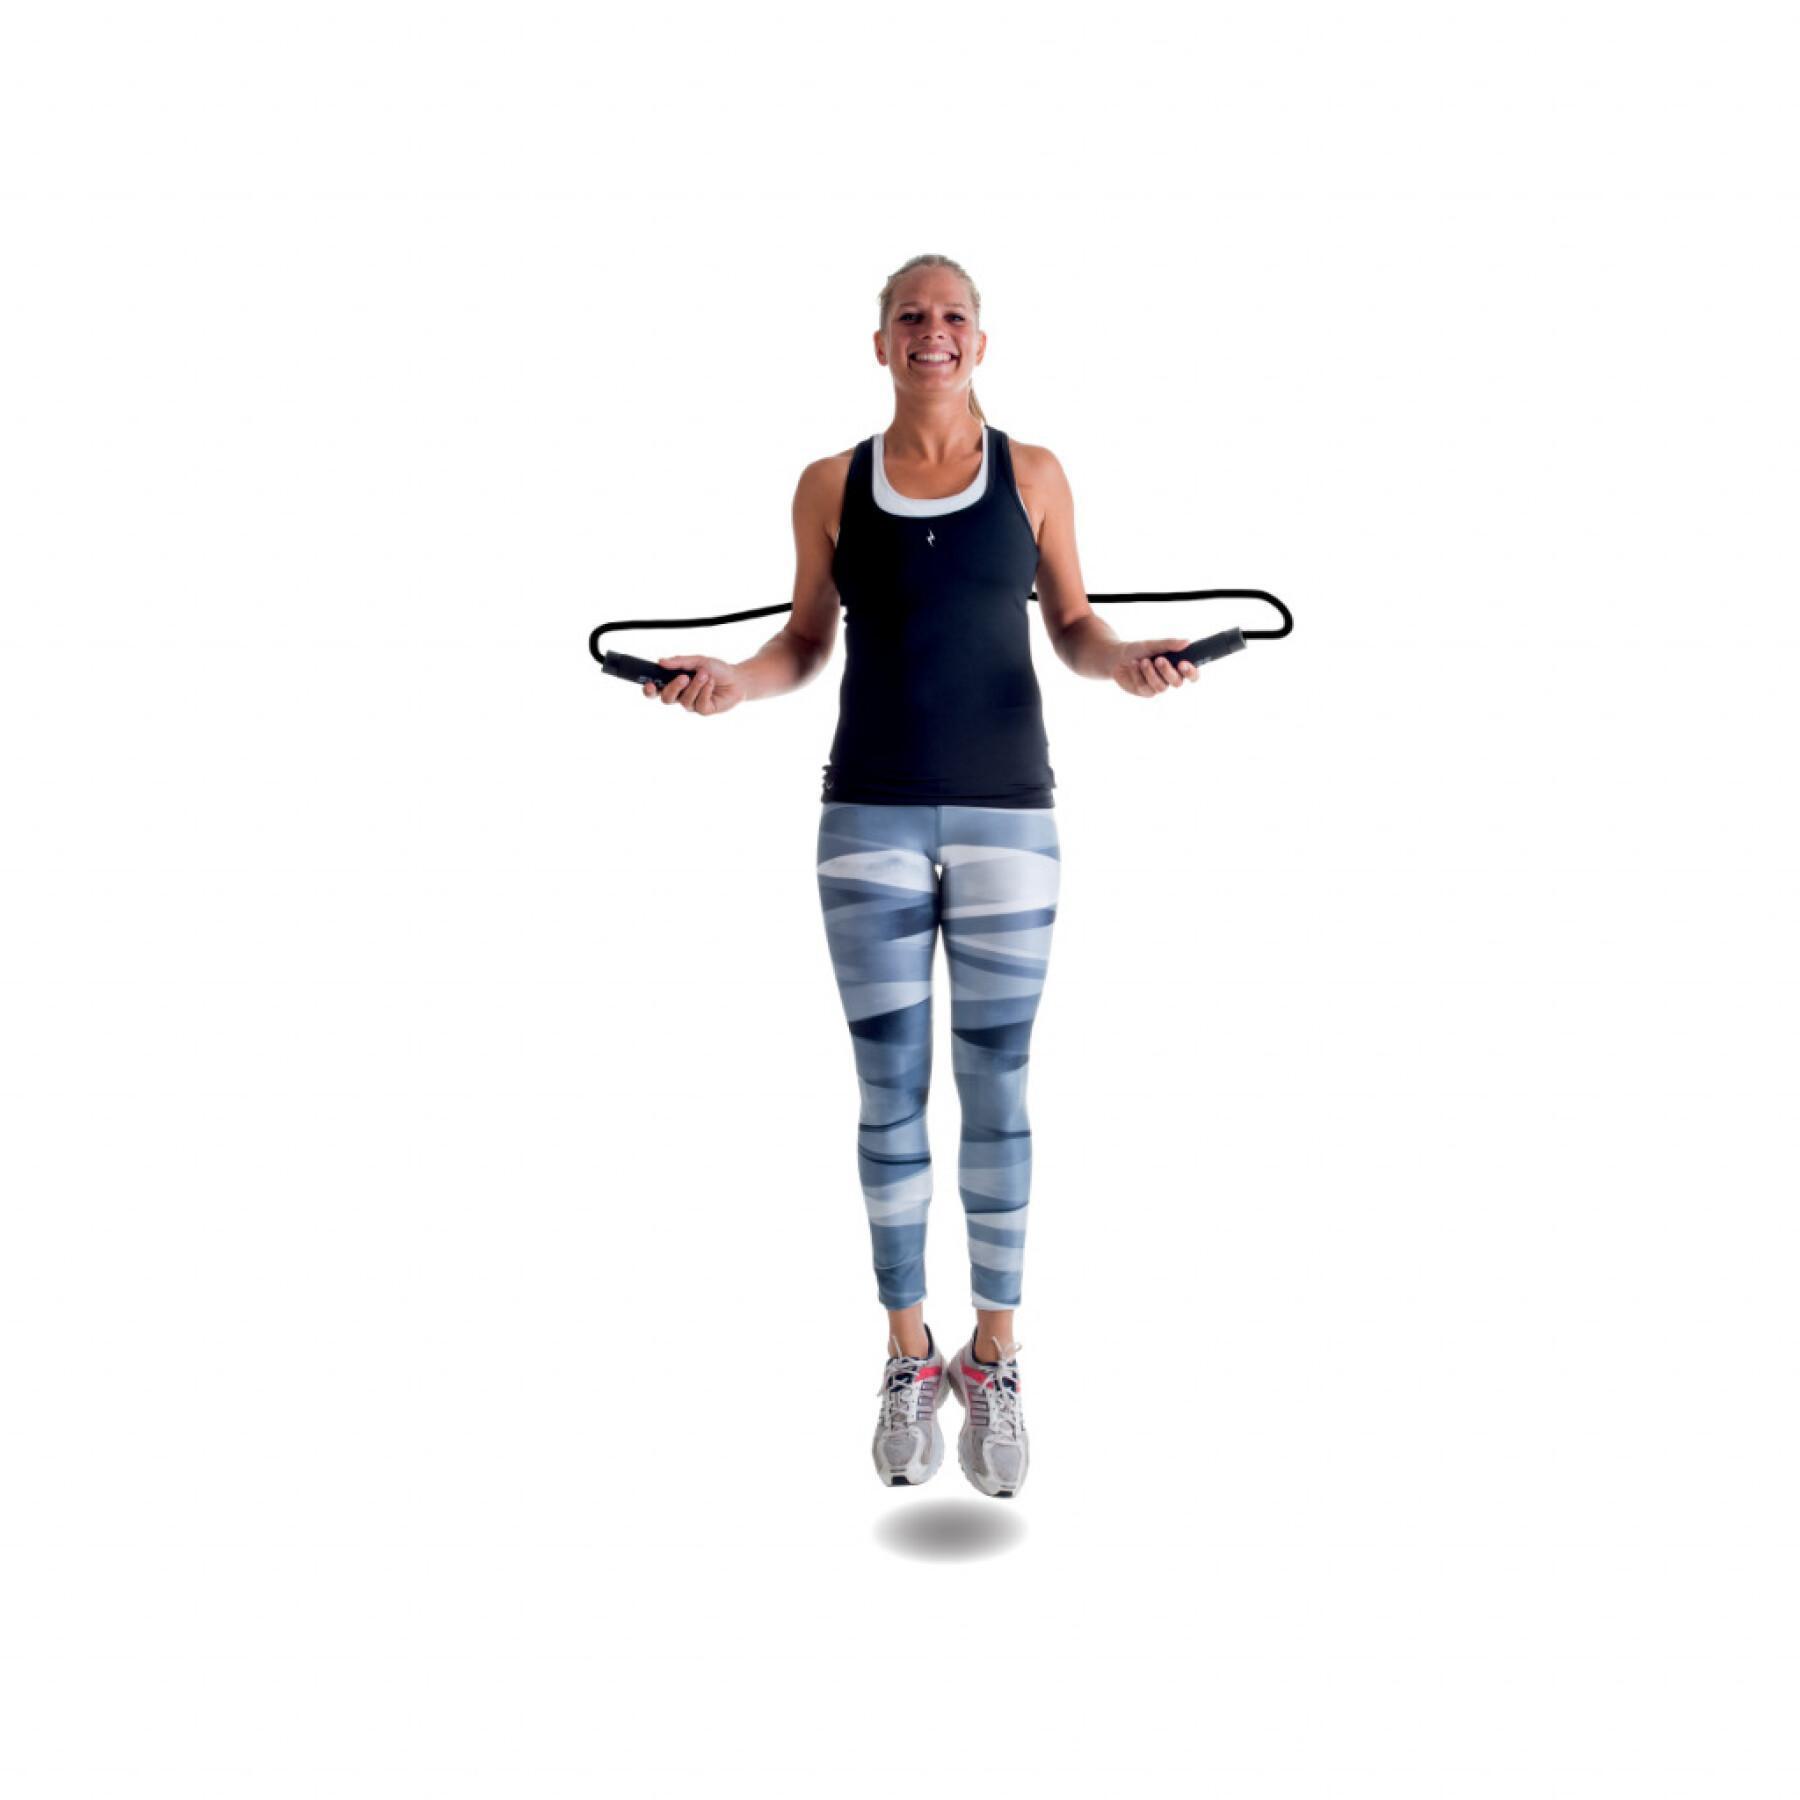 Corda per saltare Pure2Improve weighted jumprope